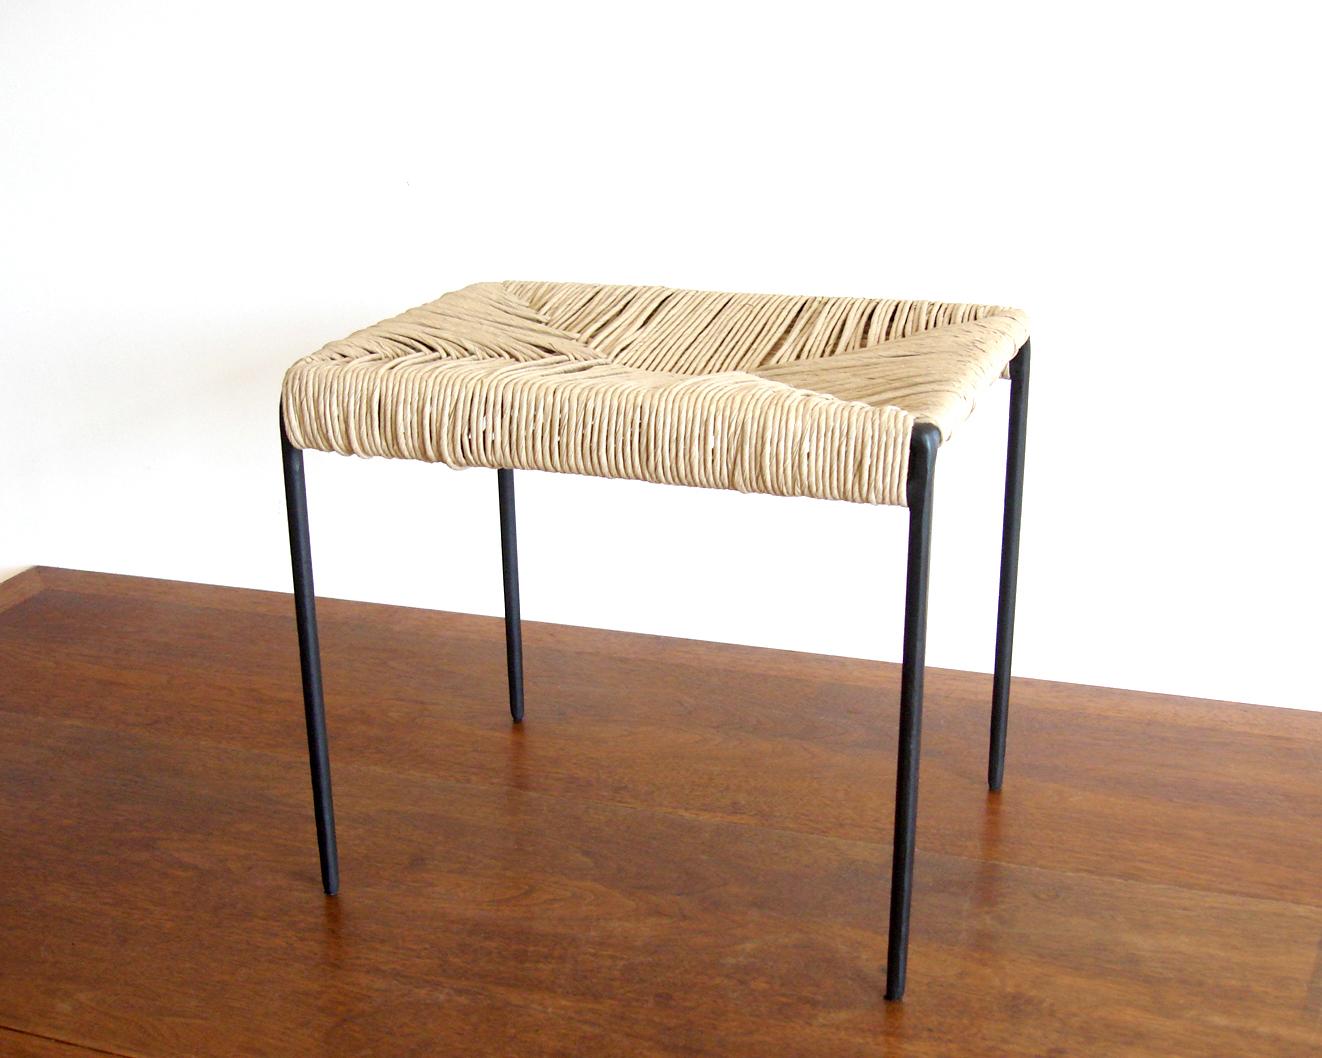 Hand-Woven Americano woven cane and blackened steel ottoman stool For Sale